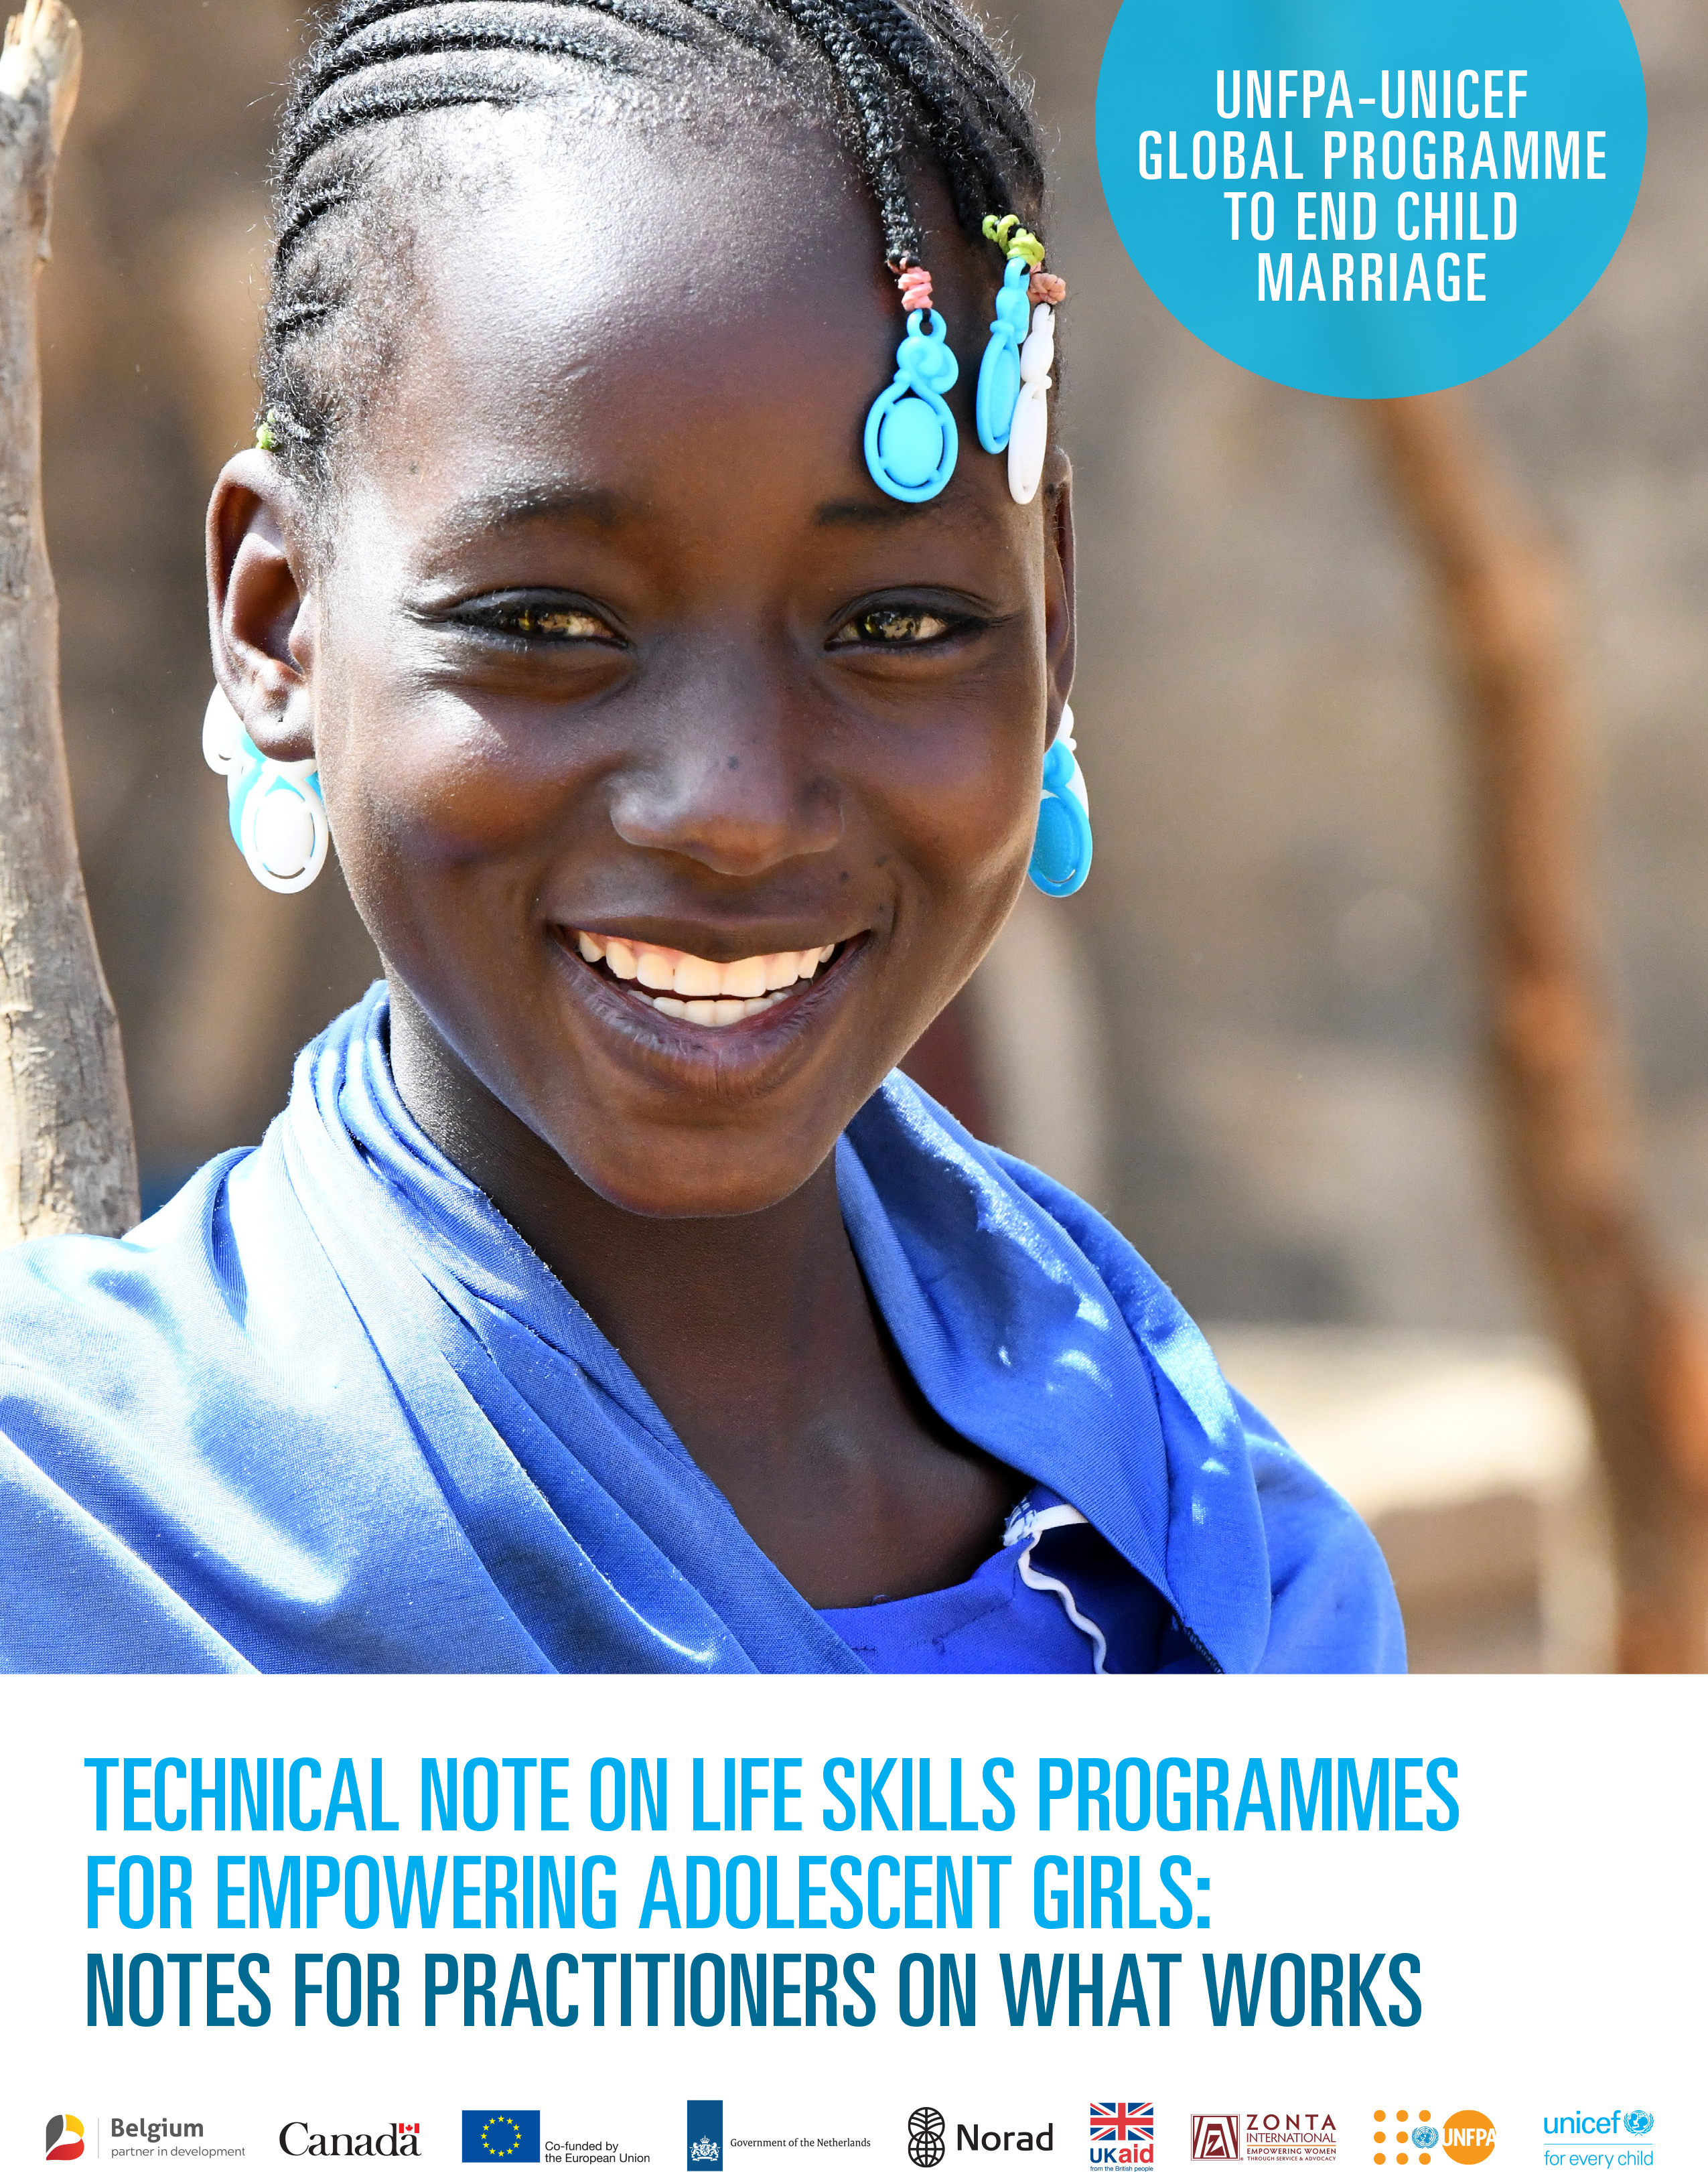 Technical Note on Life Skills Programmes for Empowering Adolescent Girls: Notes for Practitioners on What Works